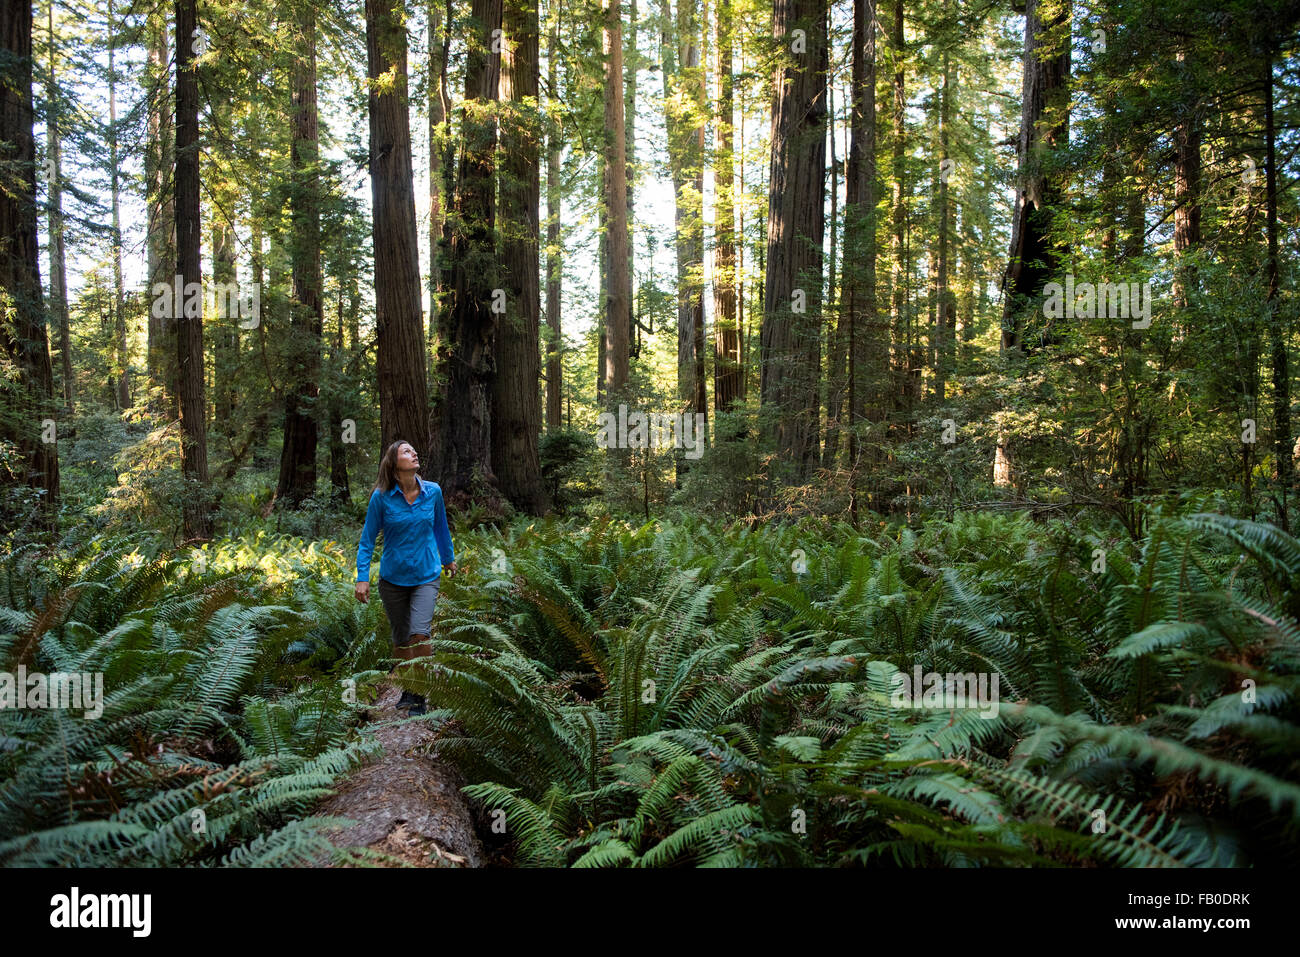 A woman walking on a log in a grove of ferns looks up at the forest in the Lady Bird Johnson Grove at Redwood National Park. Stock Photo